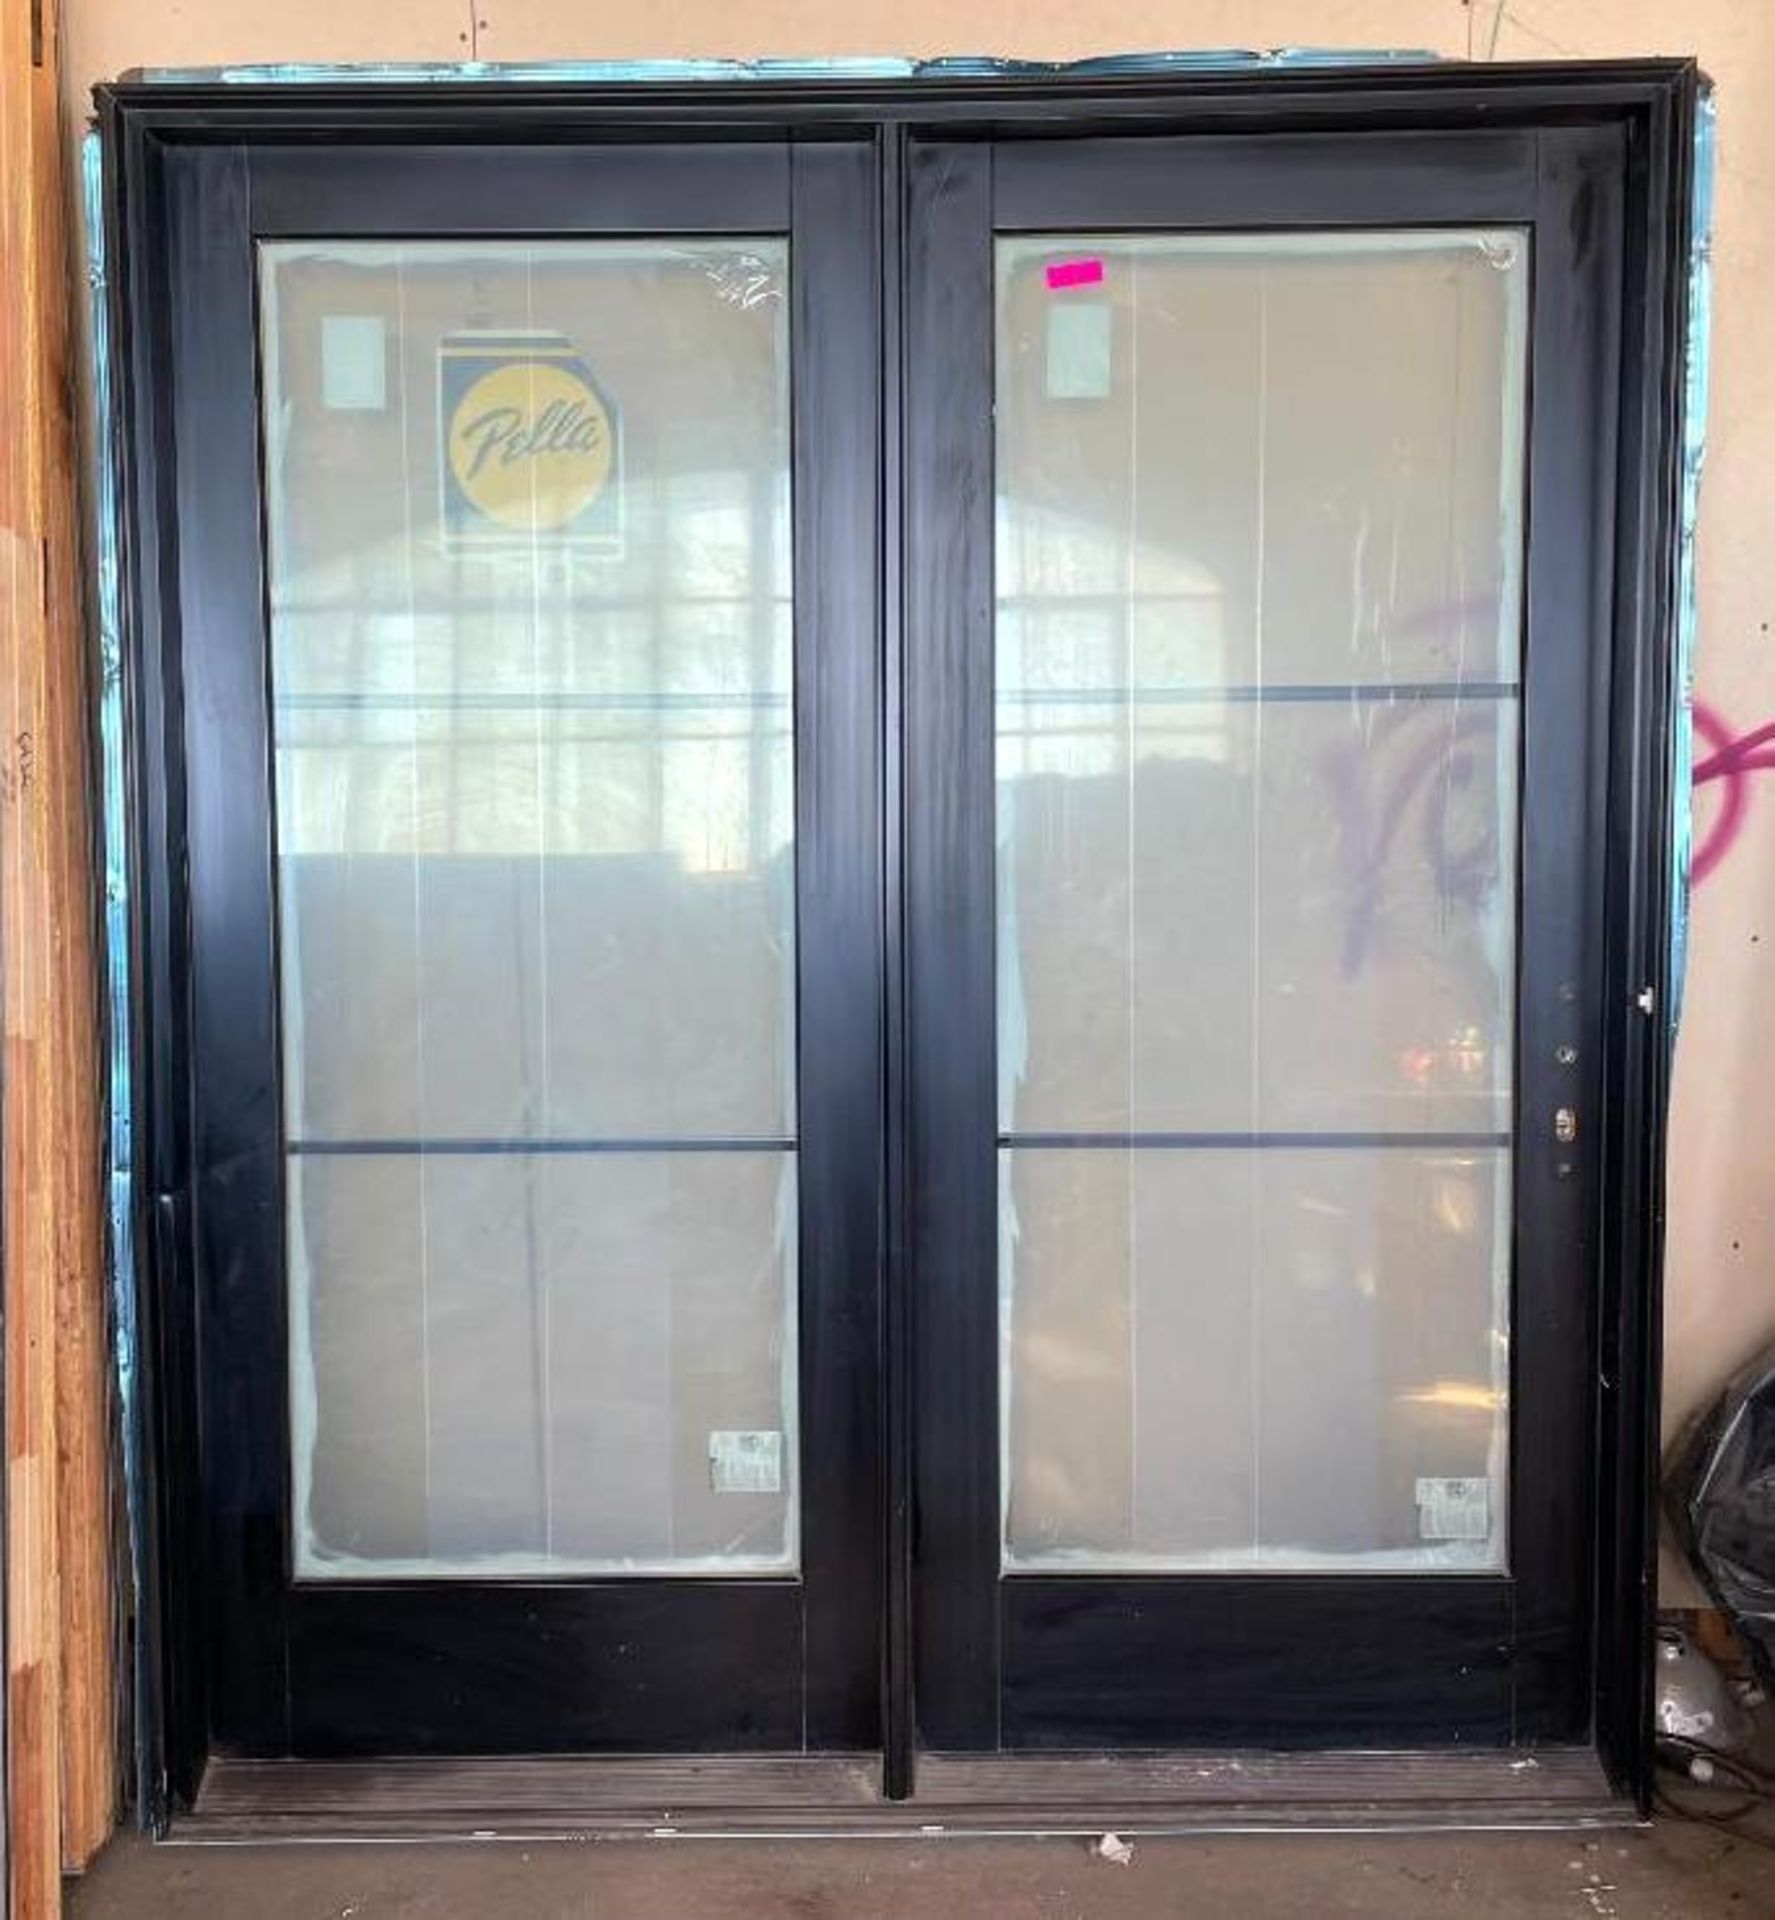 72" X 96" COMMERCIAL GLASS DOOR W/ FRAME BRAND/MODEL: PELLA SIZE: 72" X 96" LOCATION ROOM 1 QTY: 1